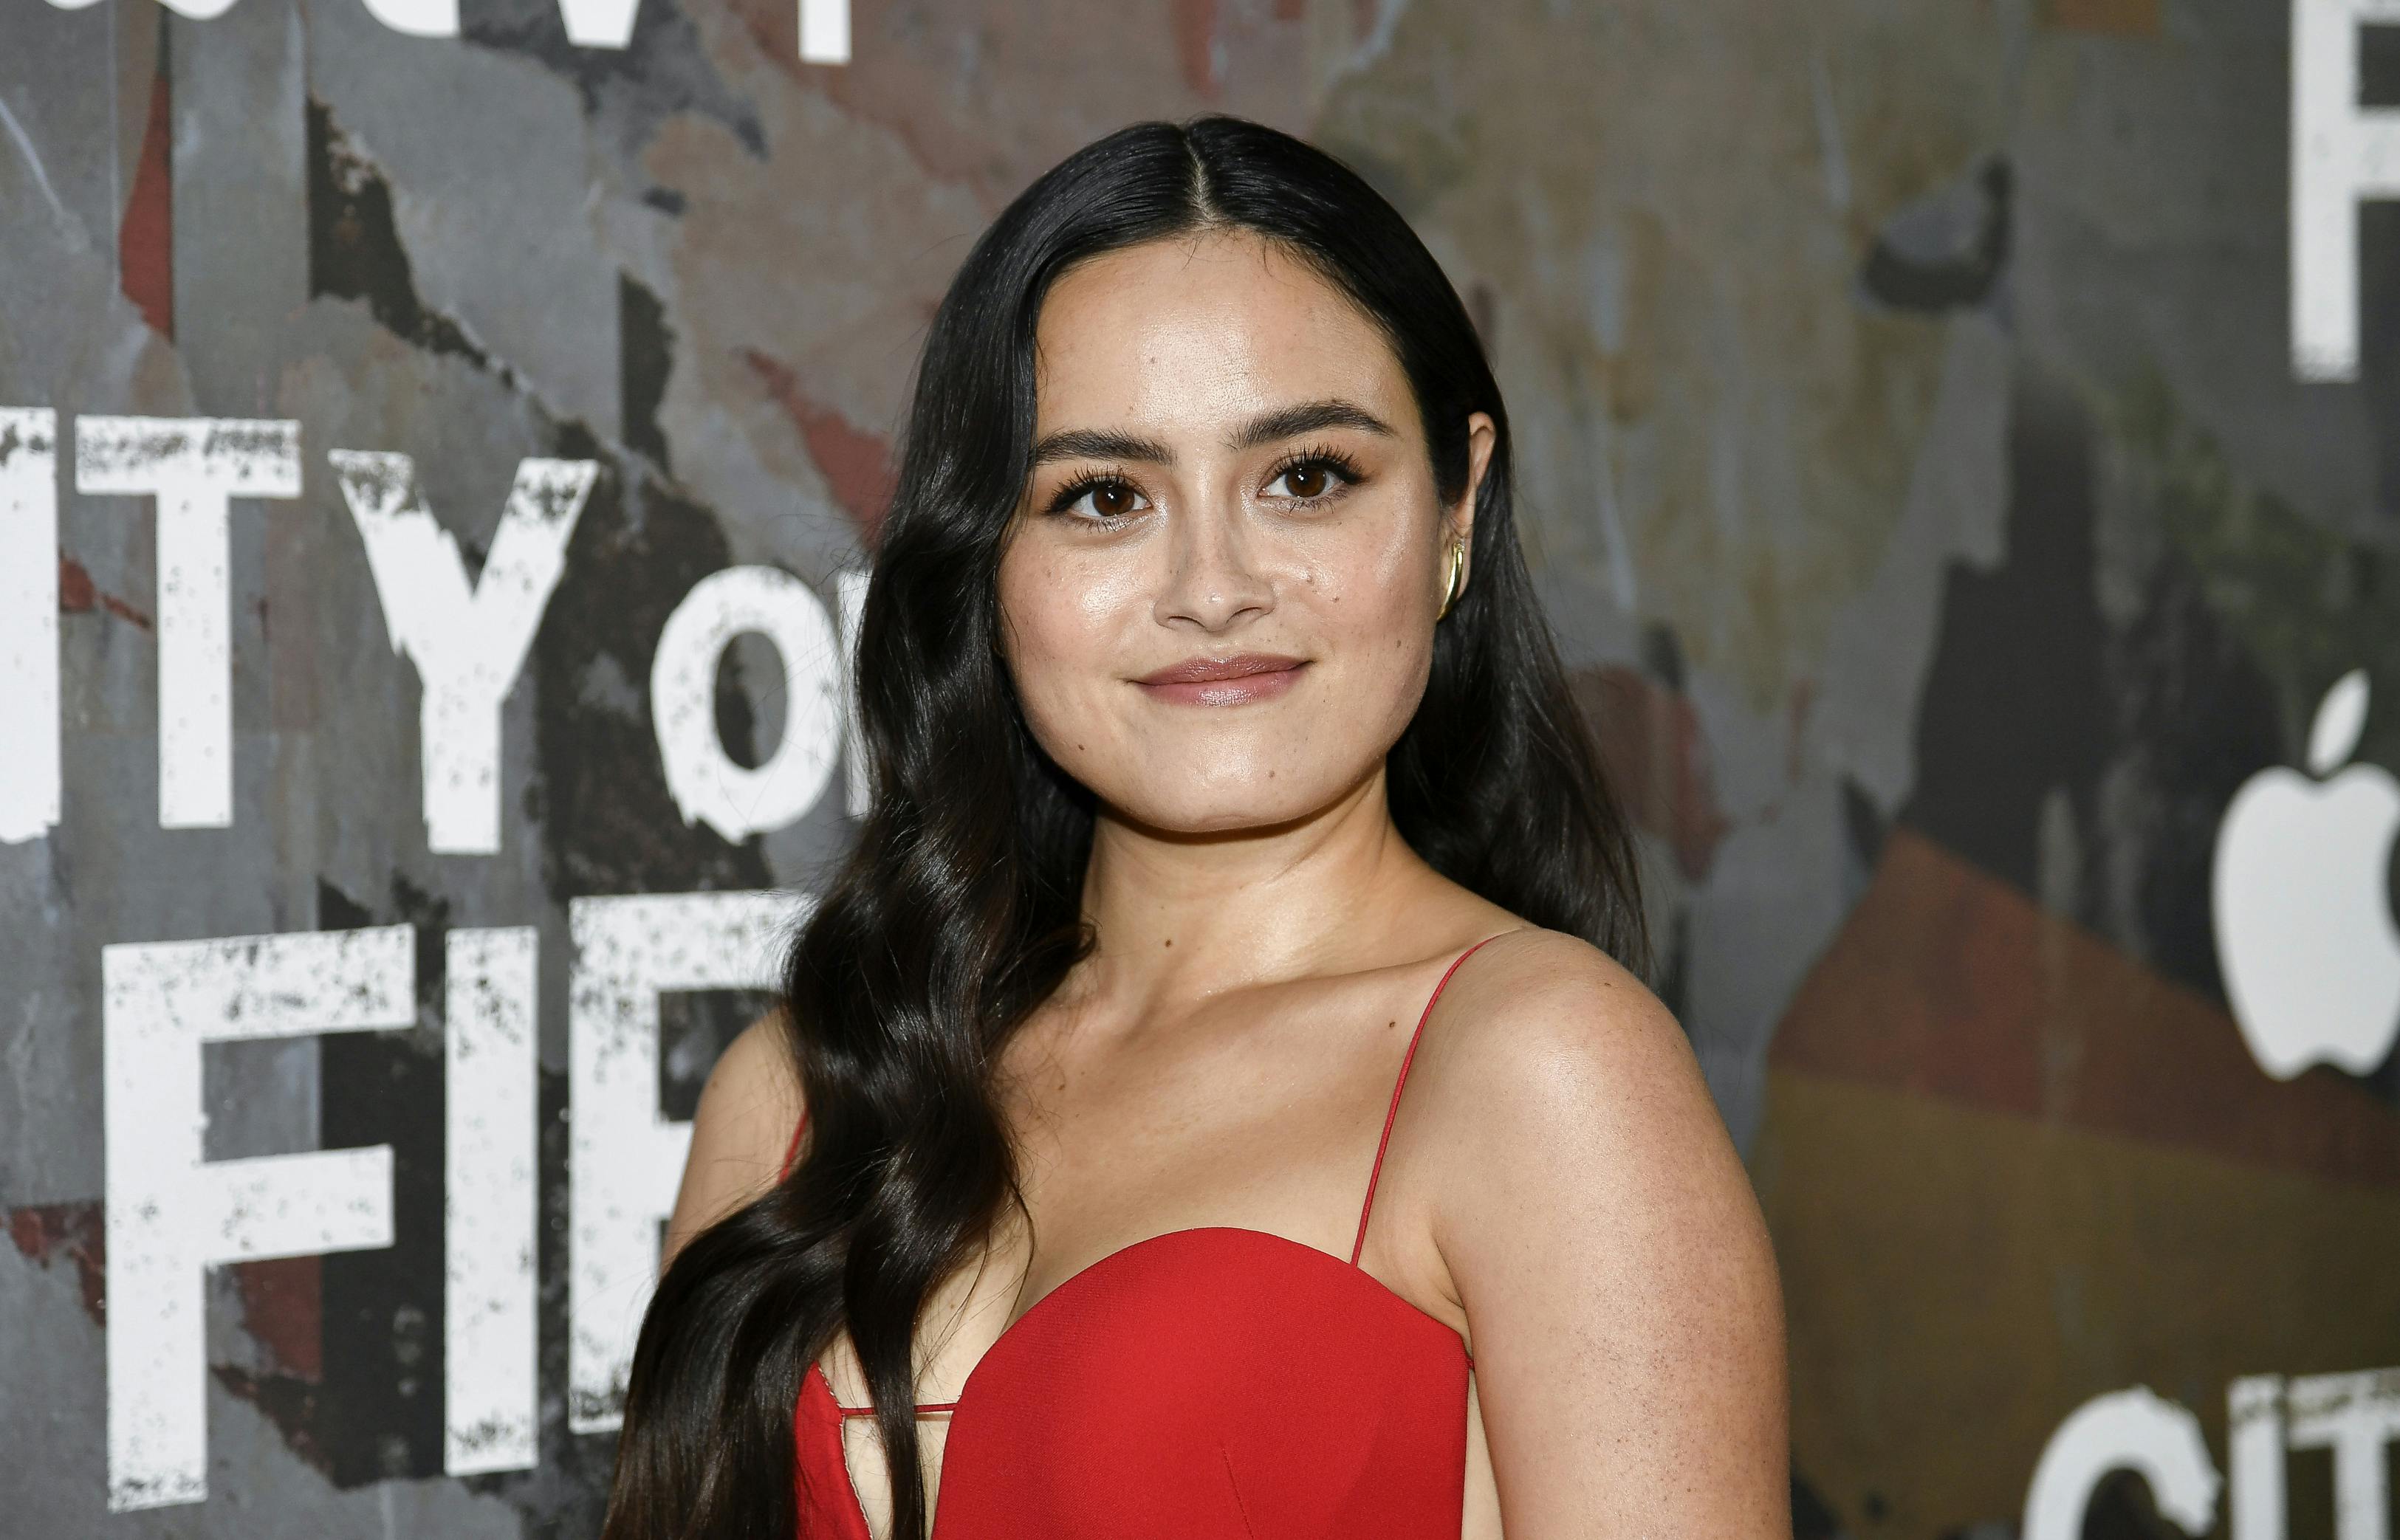 Chase Sui Wonders attends a special screening of the Apple TV+ drama "City on Fire" at Alamo Drafthouse Cinema Downtown Brooklyn on Tuesday, May 9, 2023, in New York. (Photo by Evan Agostini/Invision/AP)